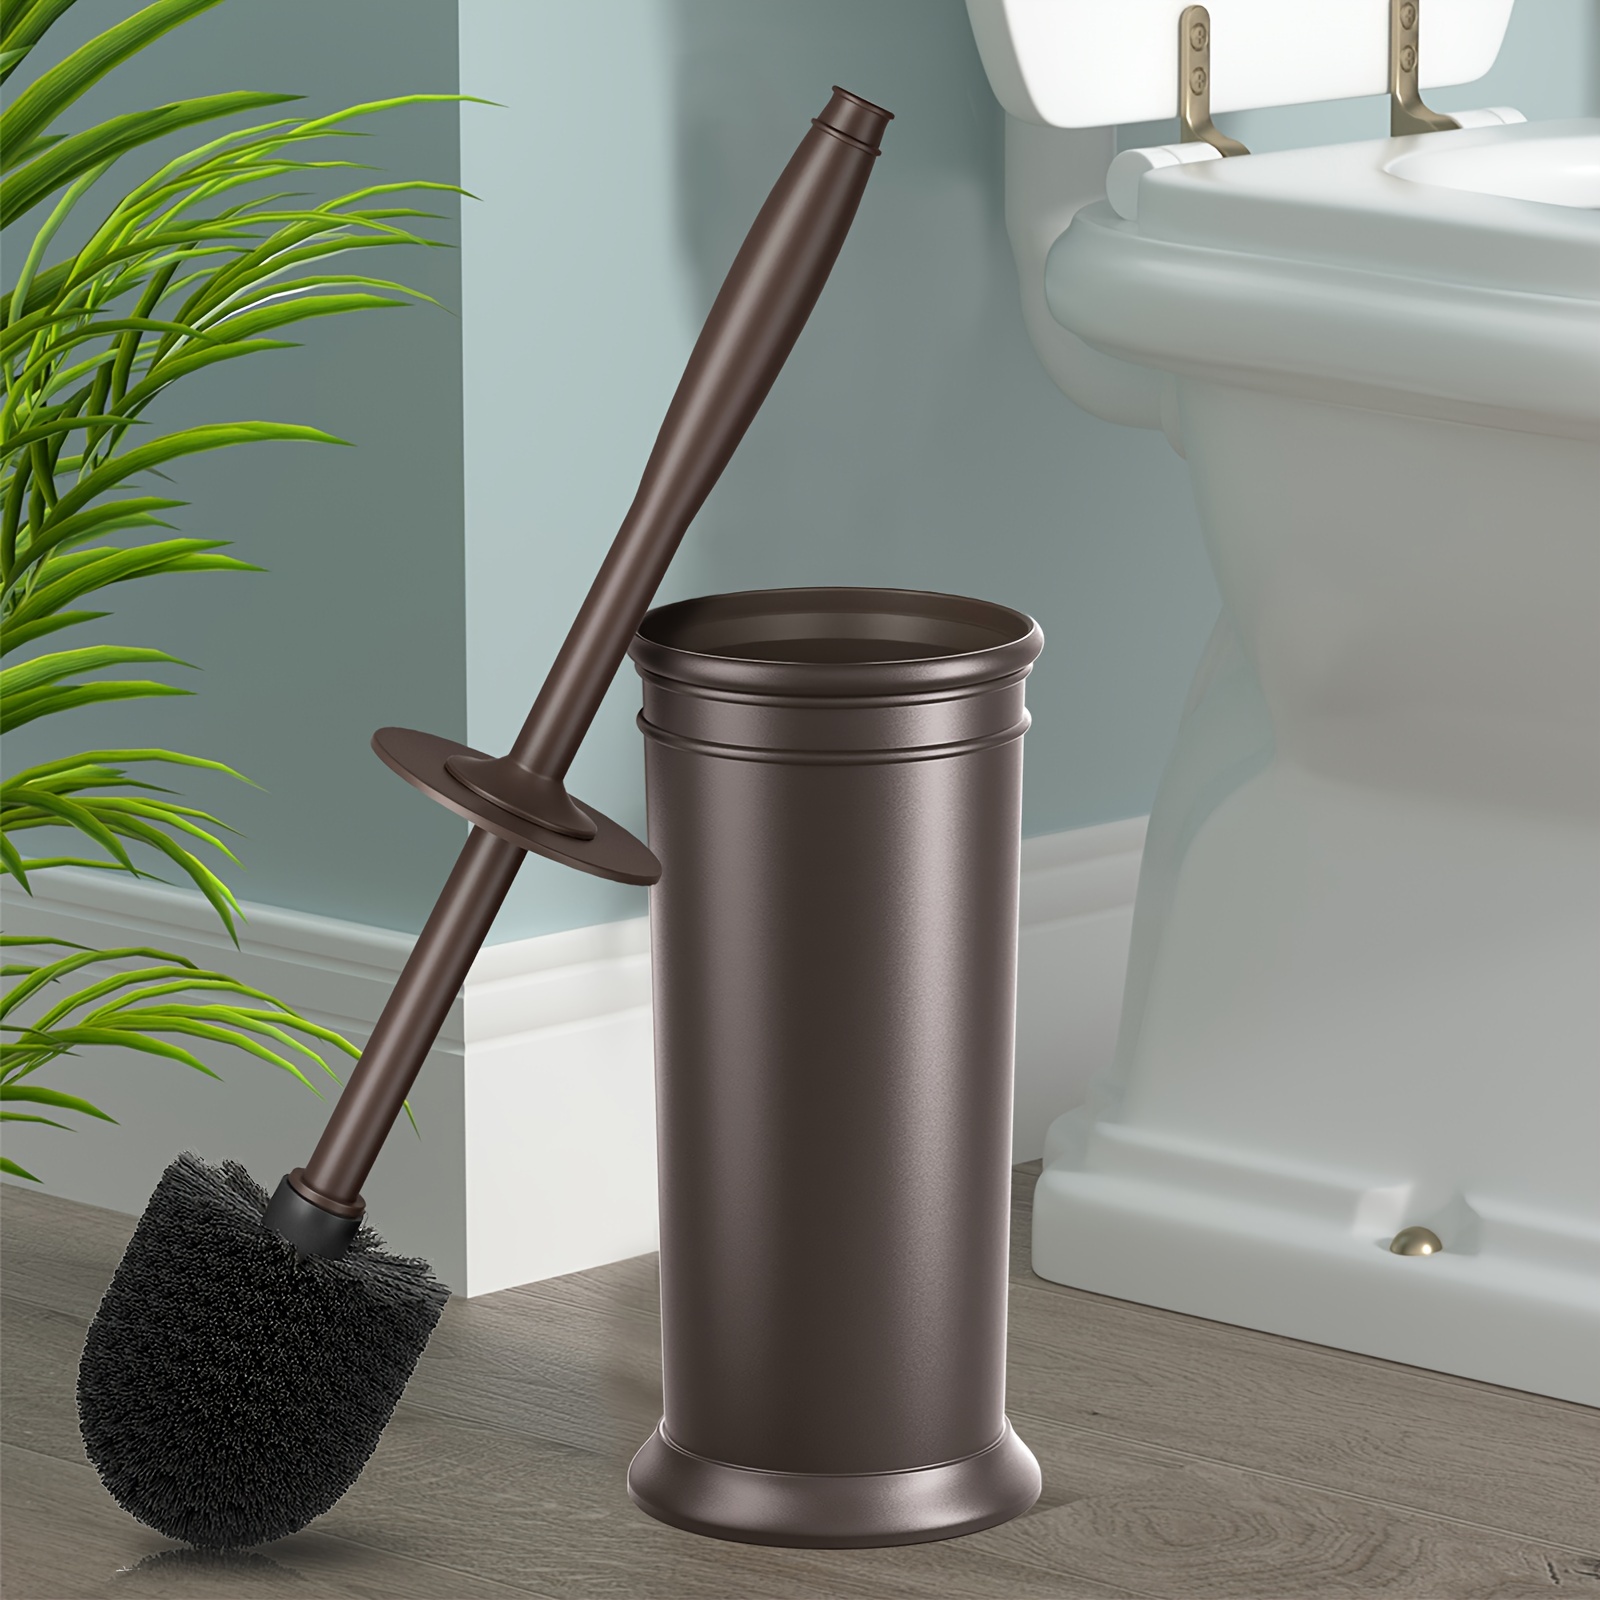 

1pc Toilet Brush, Toilet Bowl Brush With Extra Long Handle, Durable Bristles Toilet Scrubber And Covered Holder For Toilet, Brush Set For Bathroom Cleaning, (brown, 1 Set)